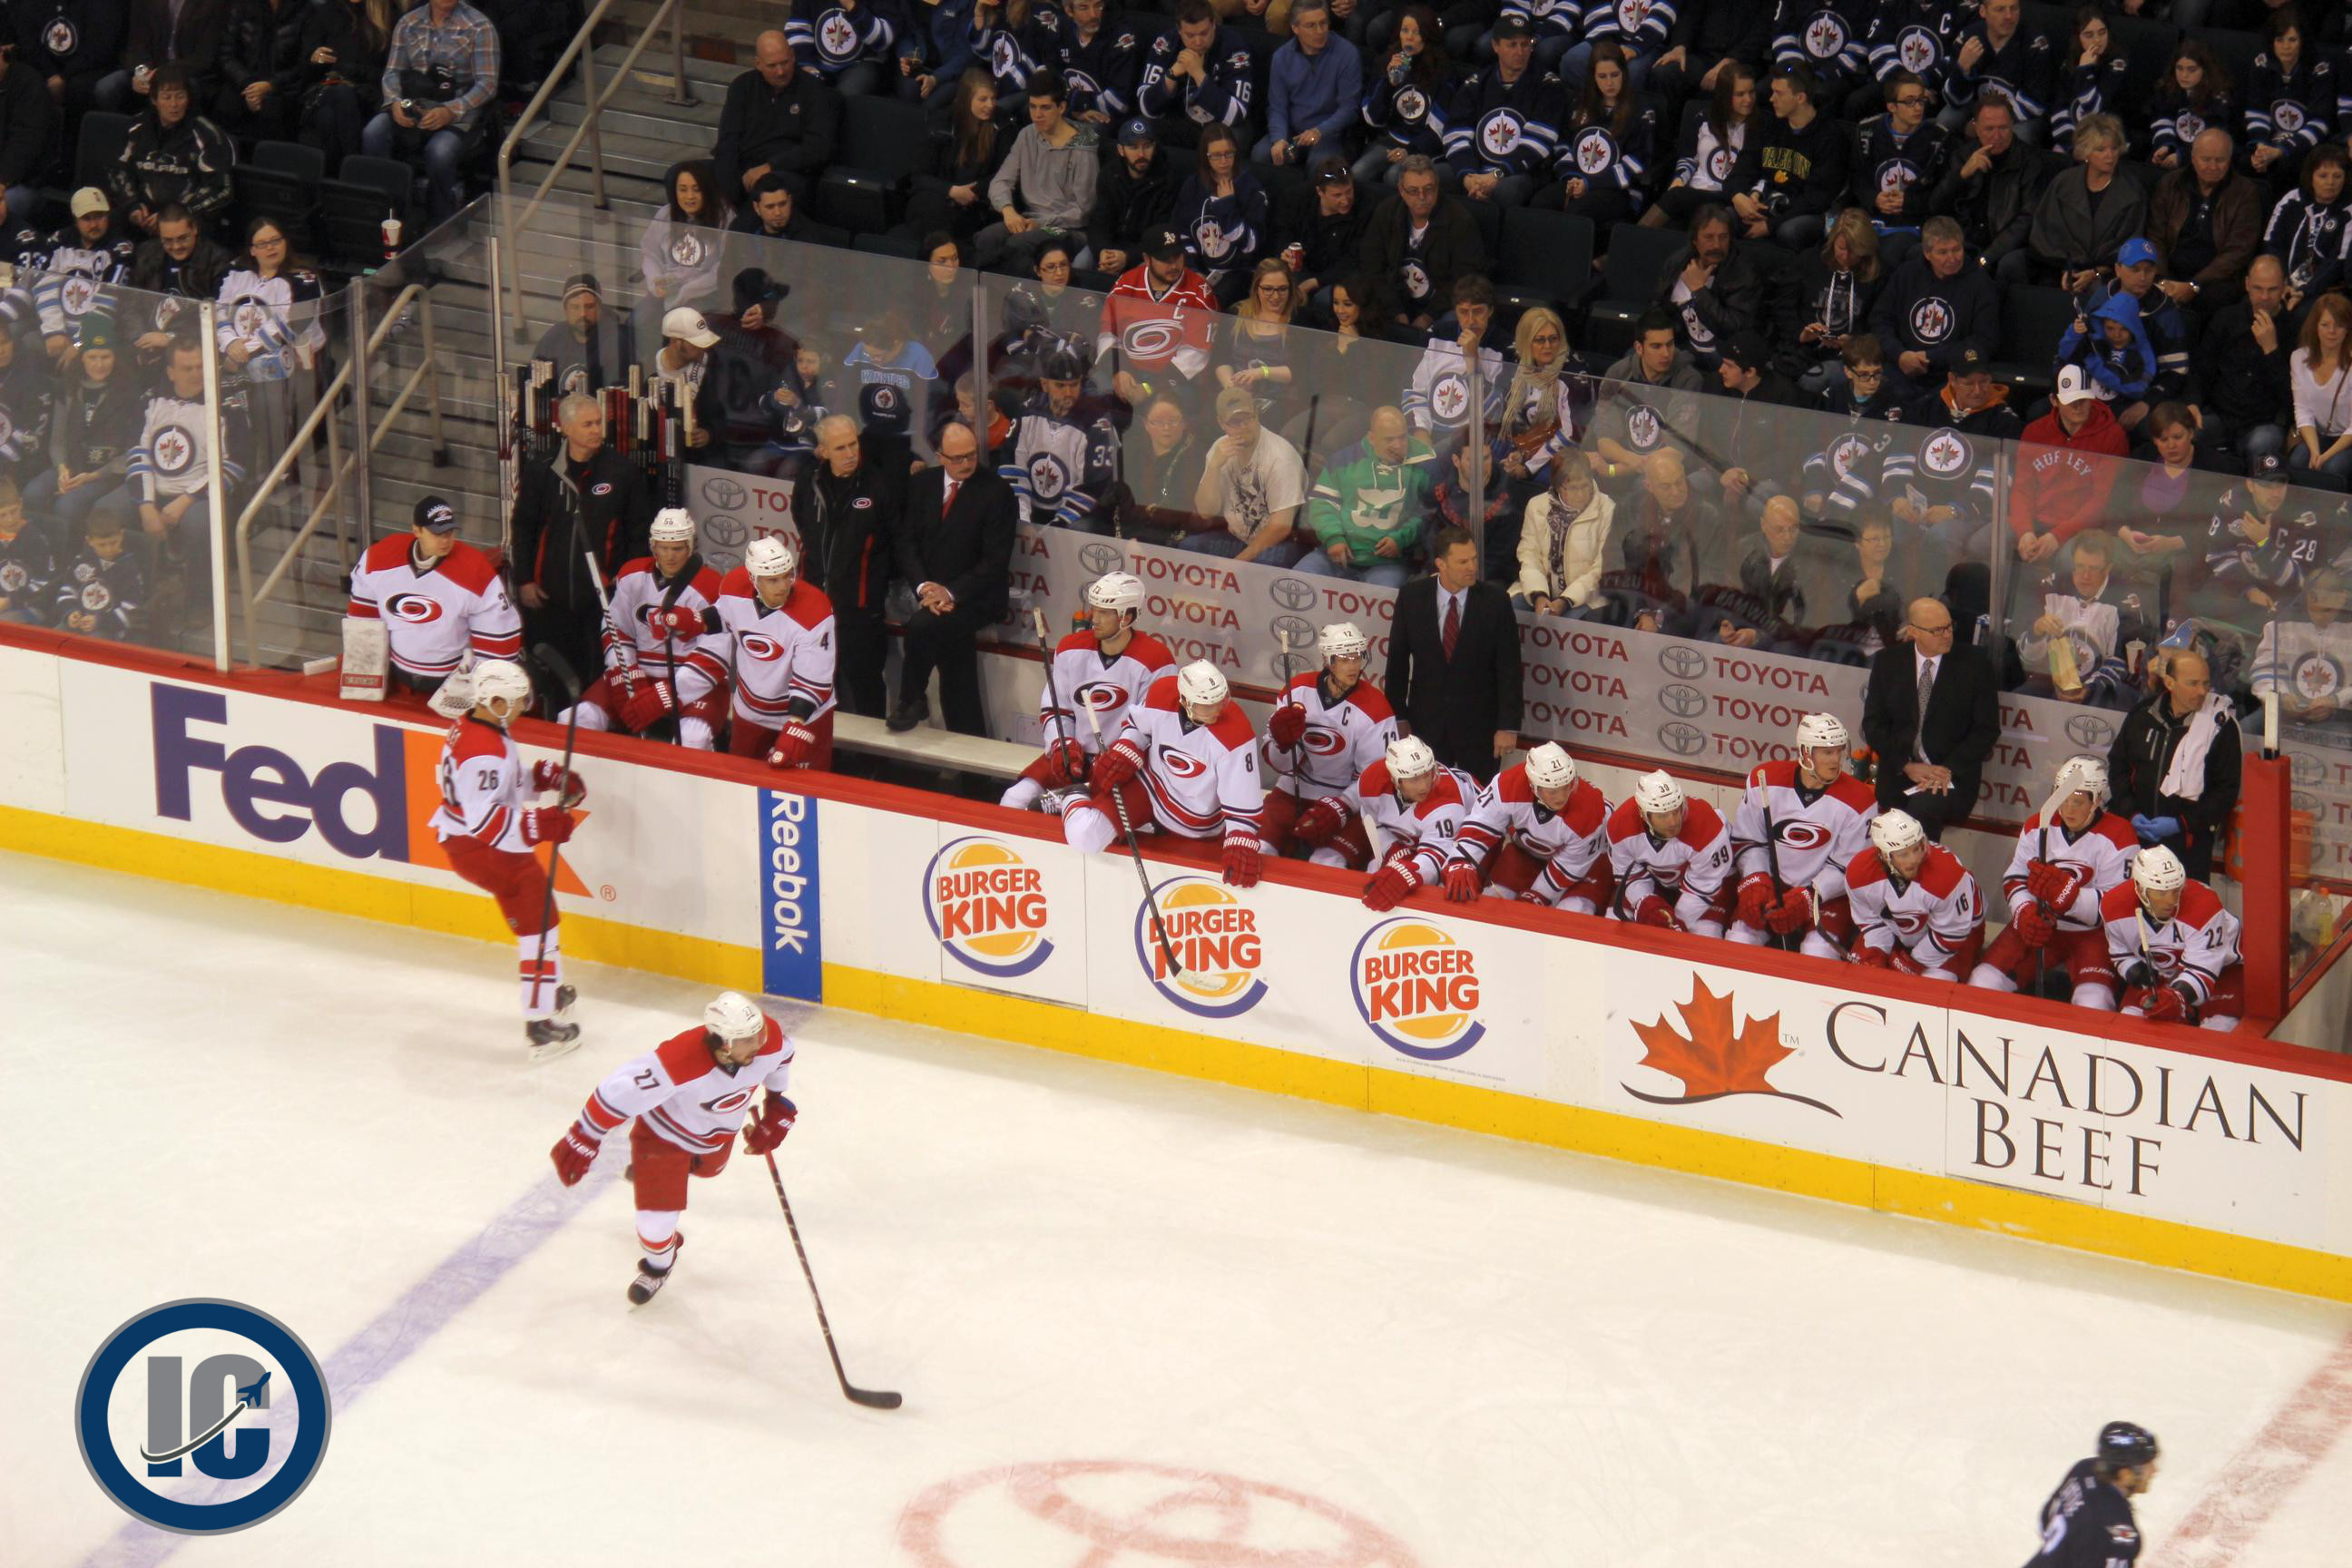 Canes bench March 22 2014